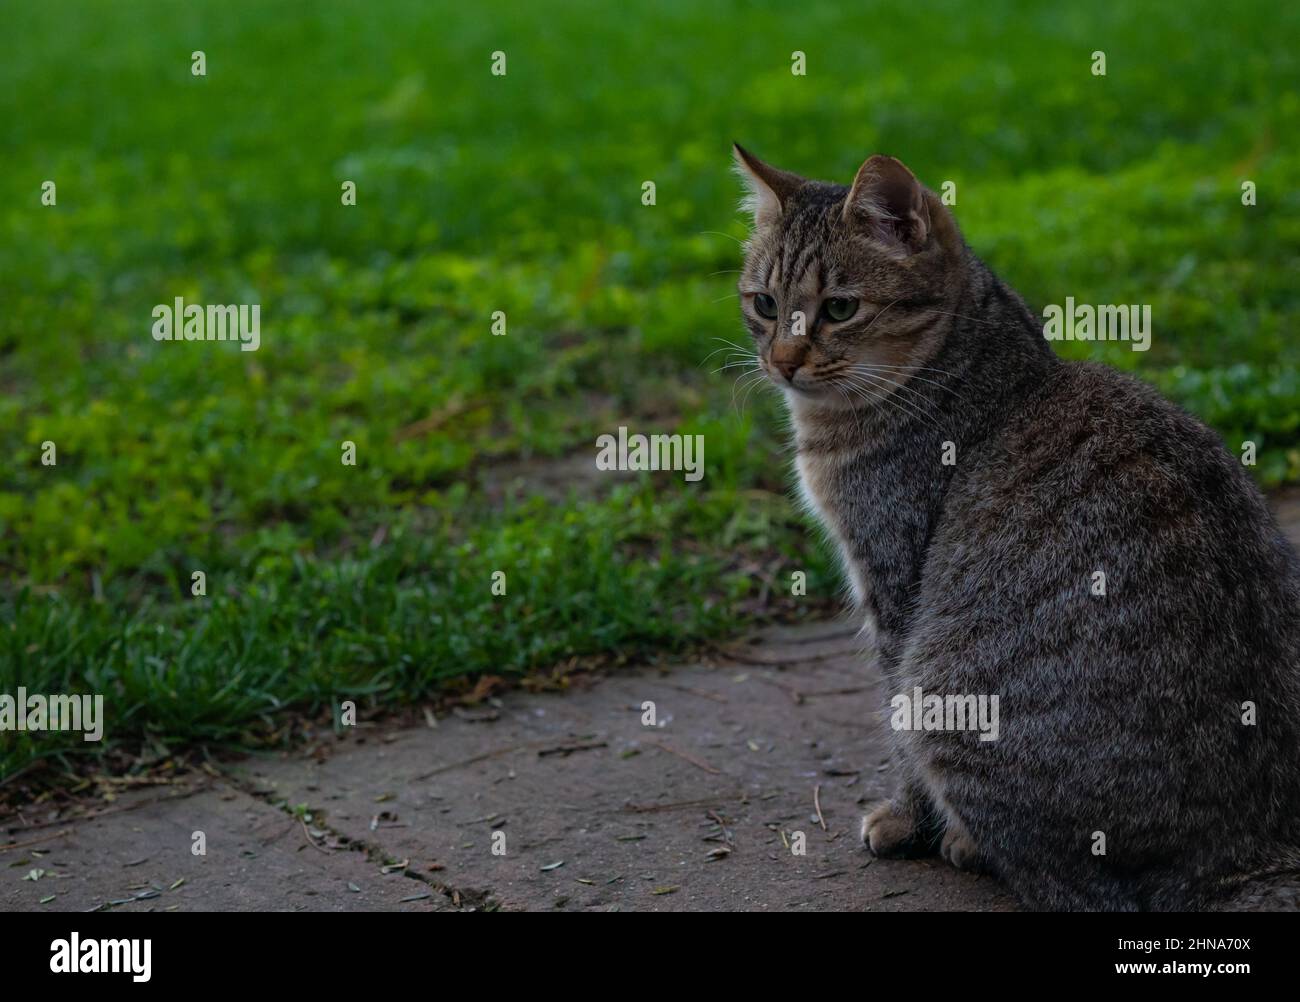 close-up shot young gray cat sitting in a garden outdoor, nature background Stock Photo